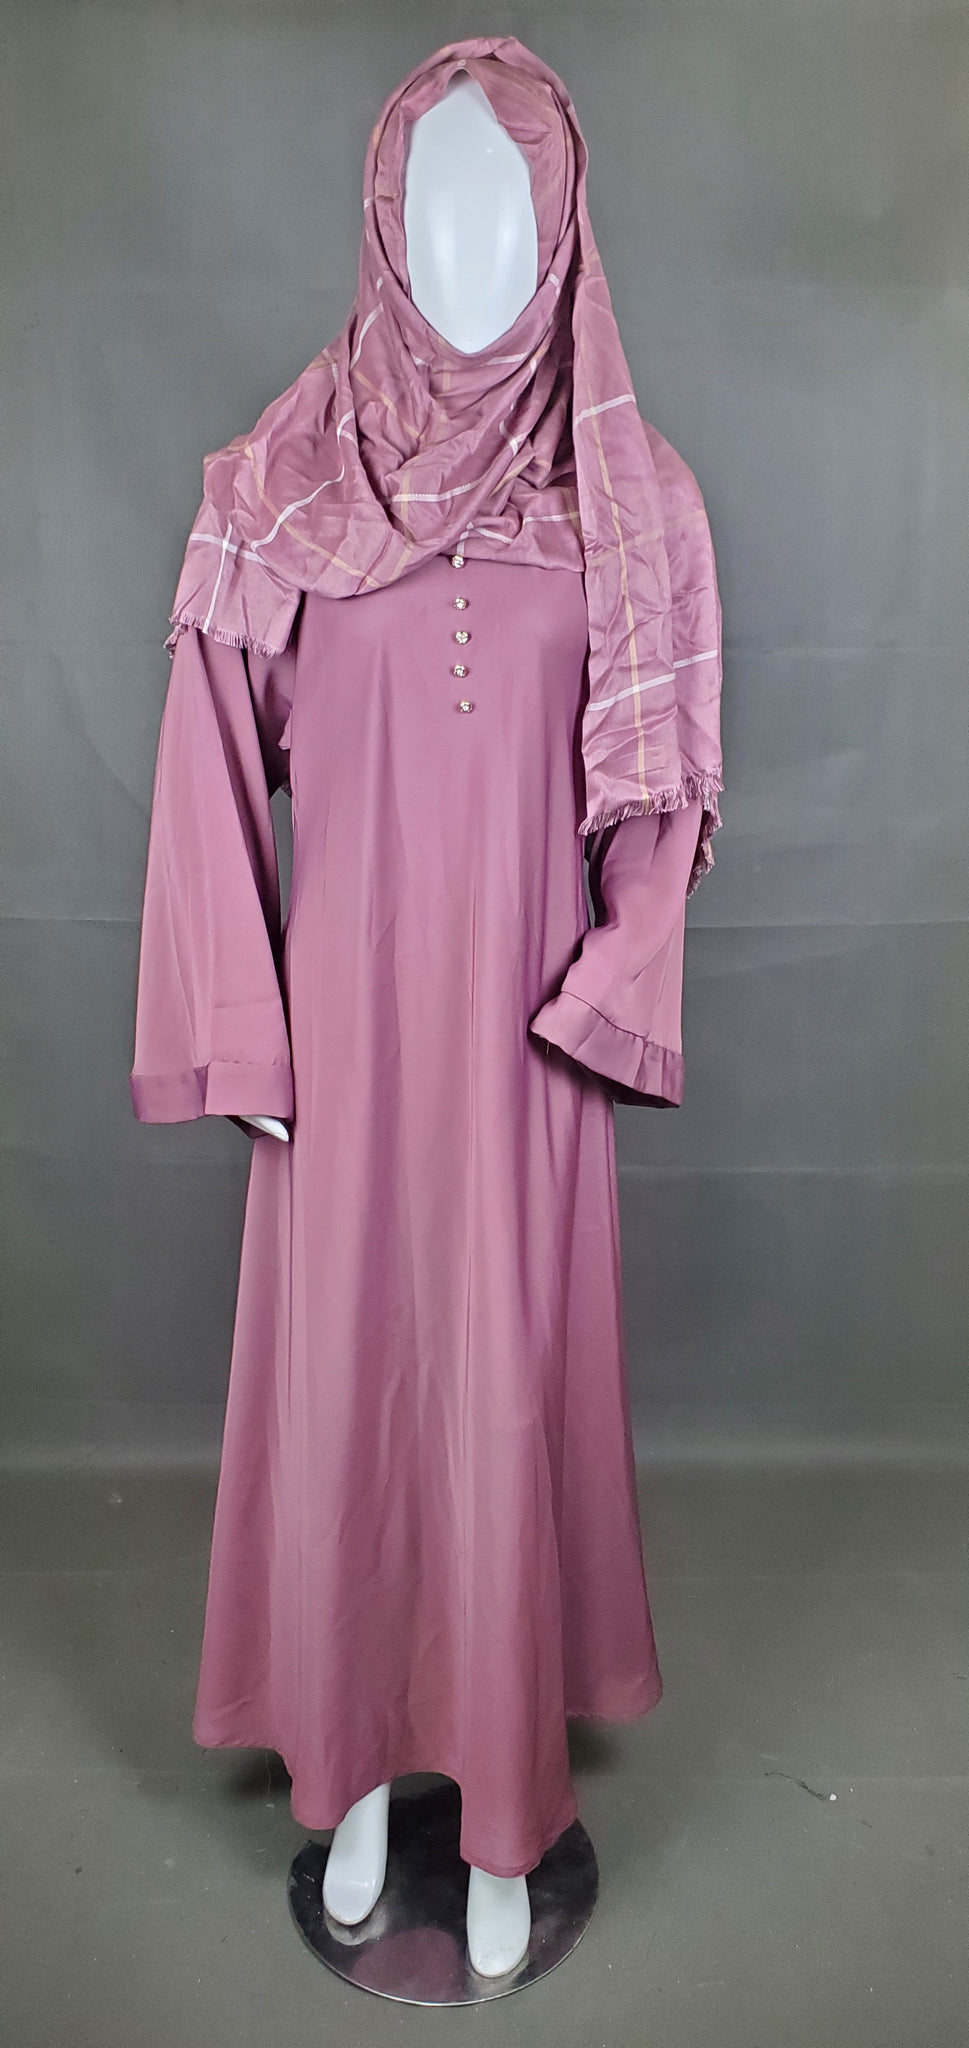 Modest Wear - Embroided Traditional Abaya - Pink